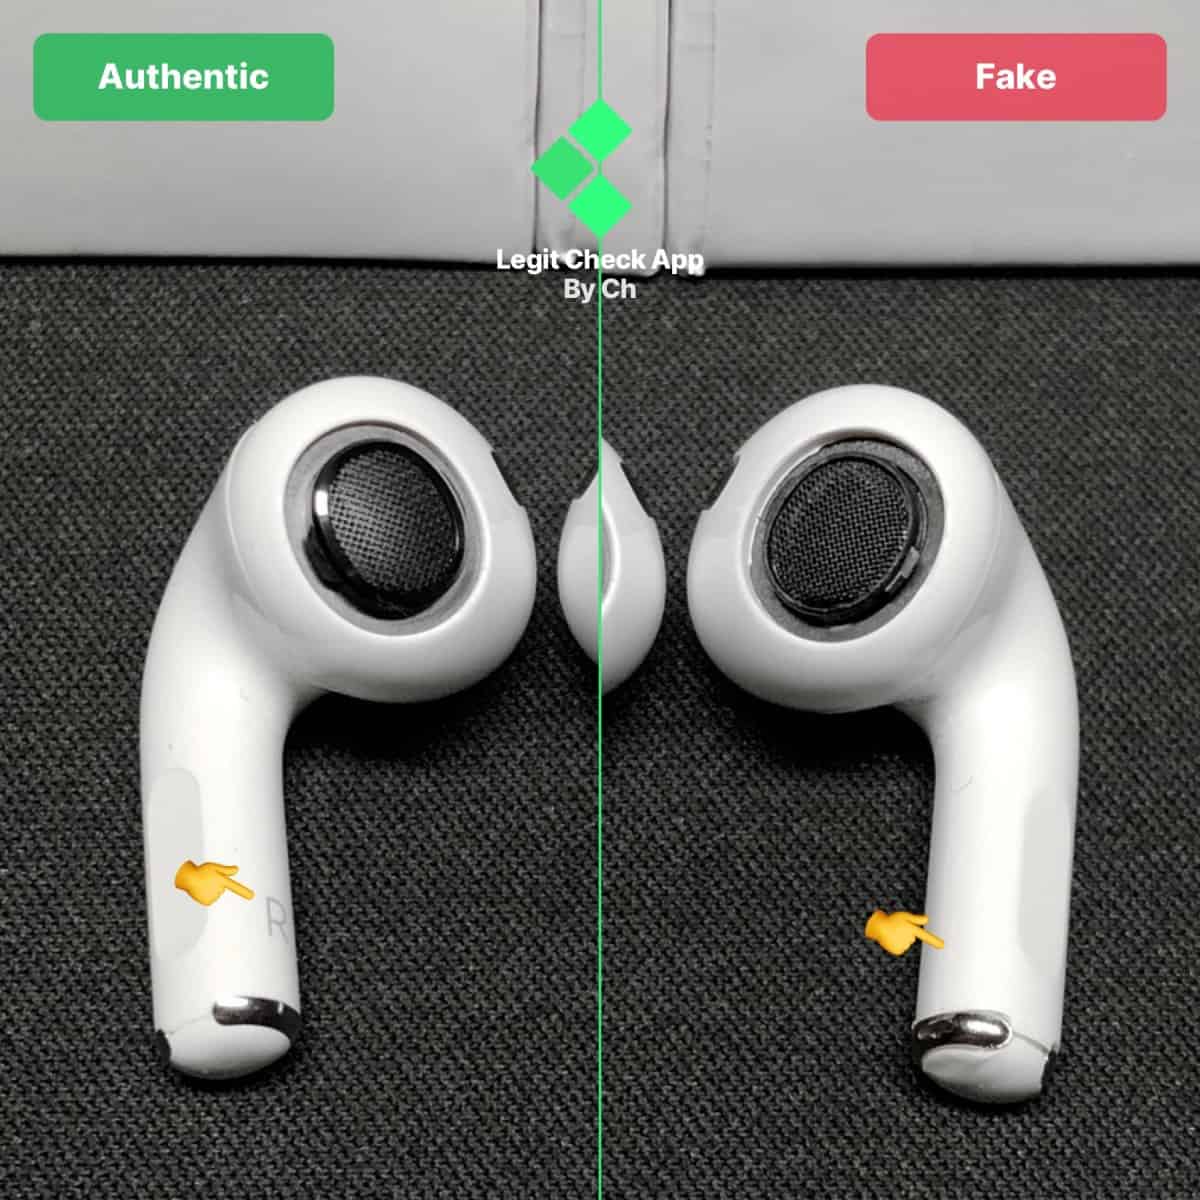 Apple Airpods Pro Real Vs Fake How To Spot Fake Airpods Pro Legit Check By Ch